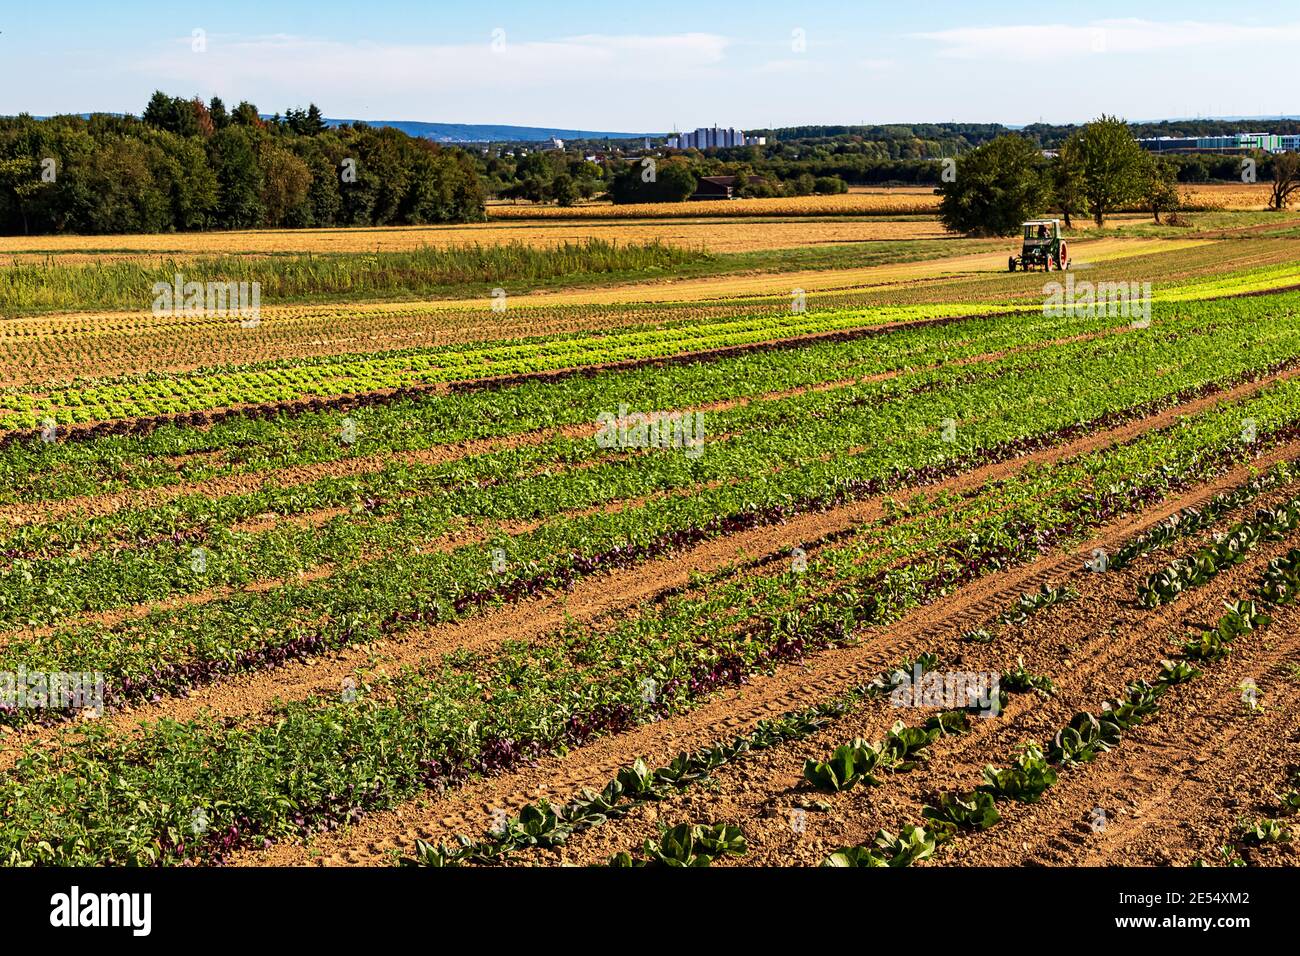 Organic farming in Germany. Large fields with different lettuce plants. Stock Photo